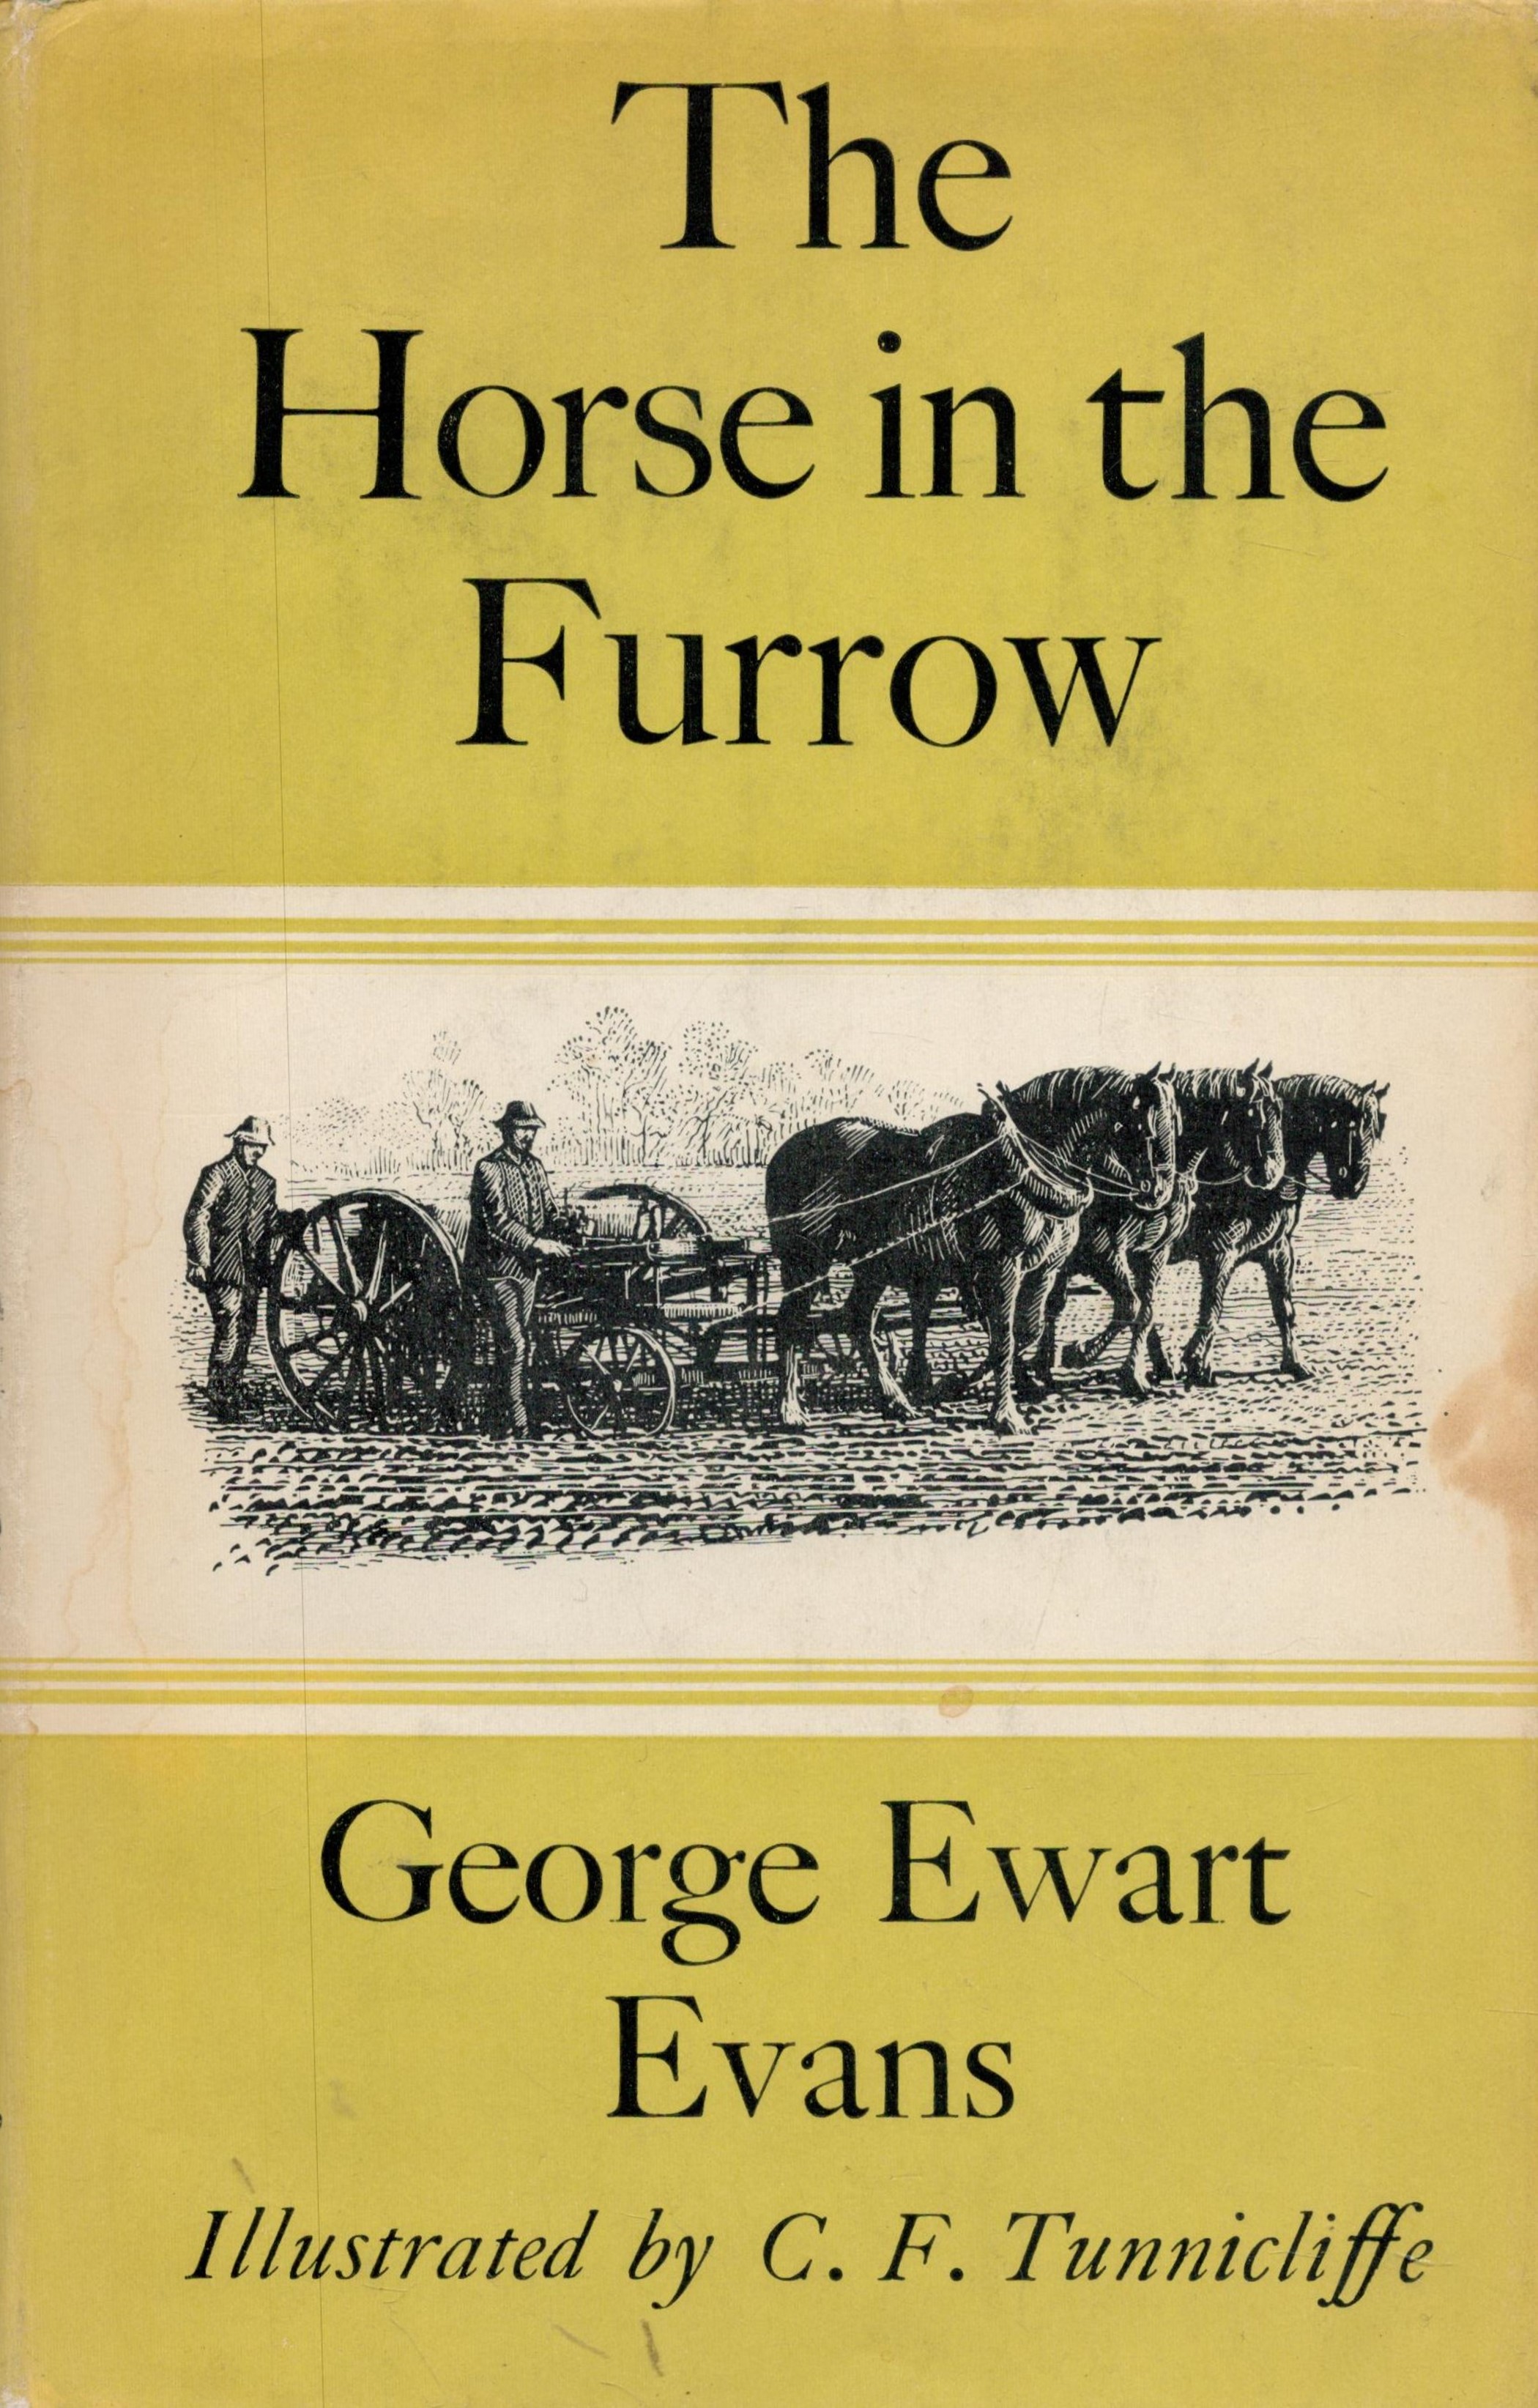 The Horse In The Furrow by George Ewart Evans 1960 First Edition Hardback Book with 292 pages